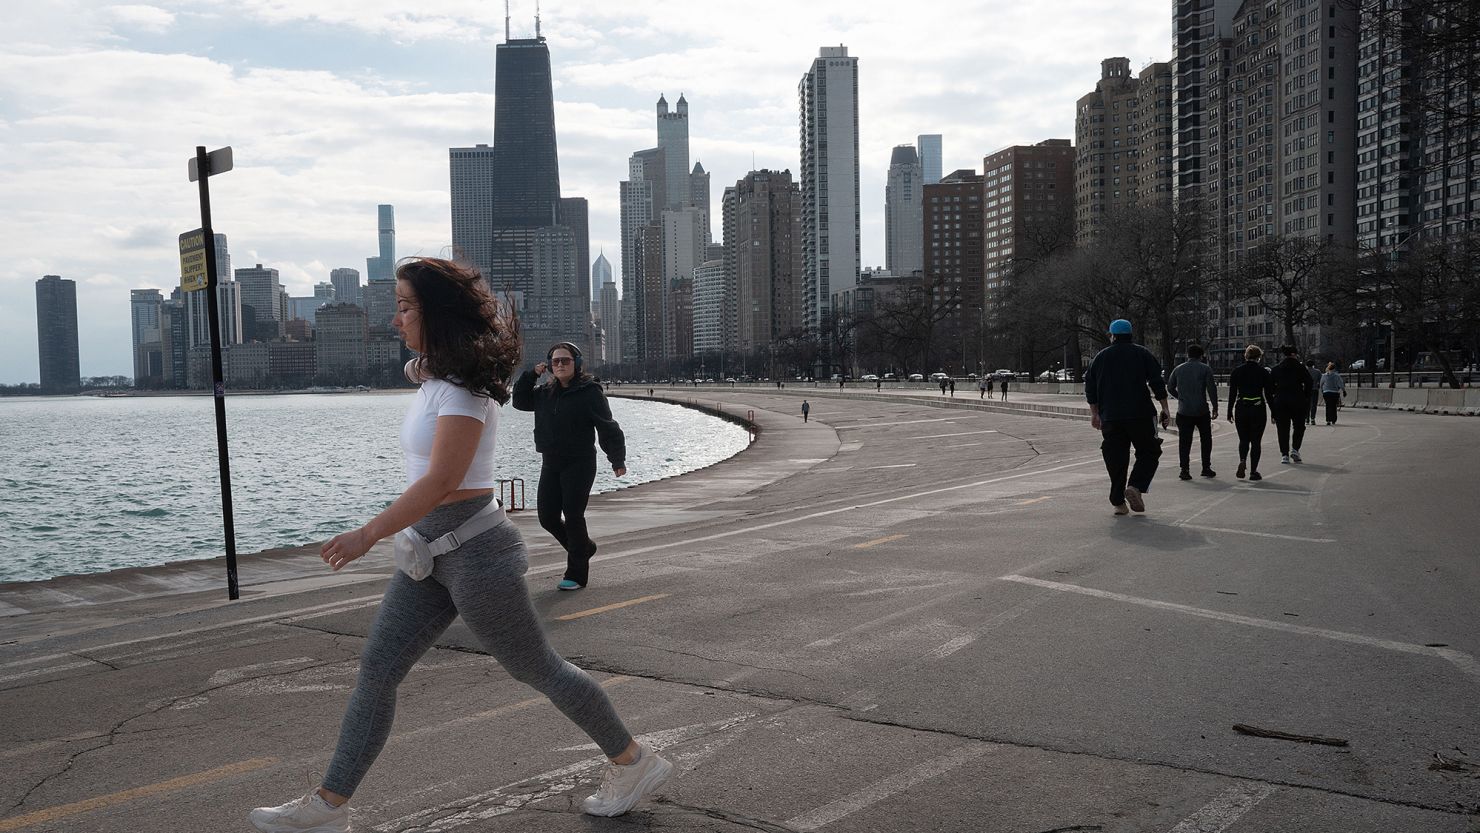 People walk along the Chicago lakefront during an unseasonably warm day on February 8.